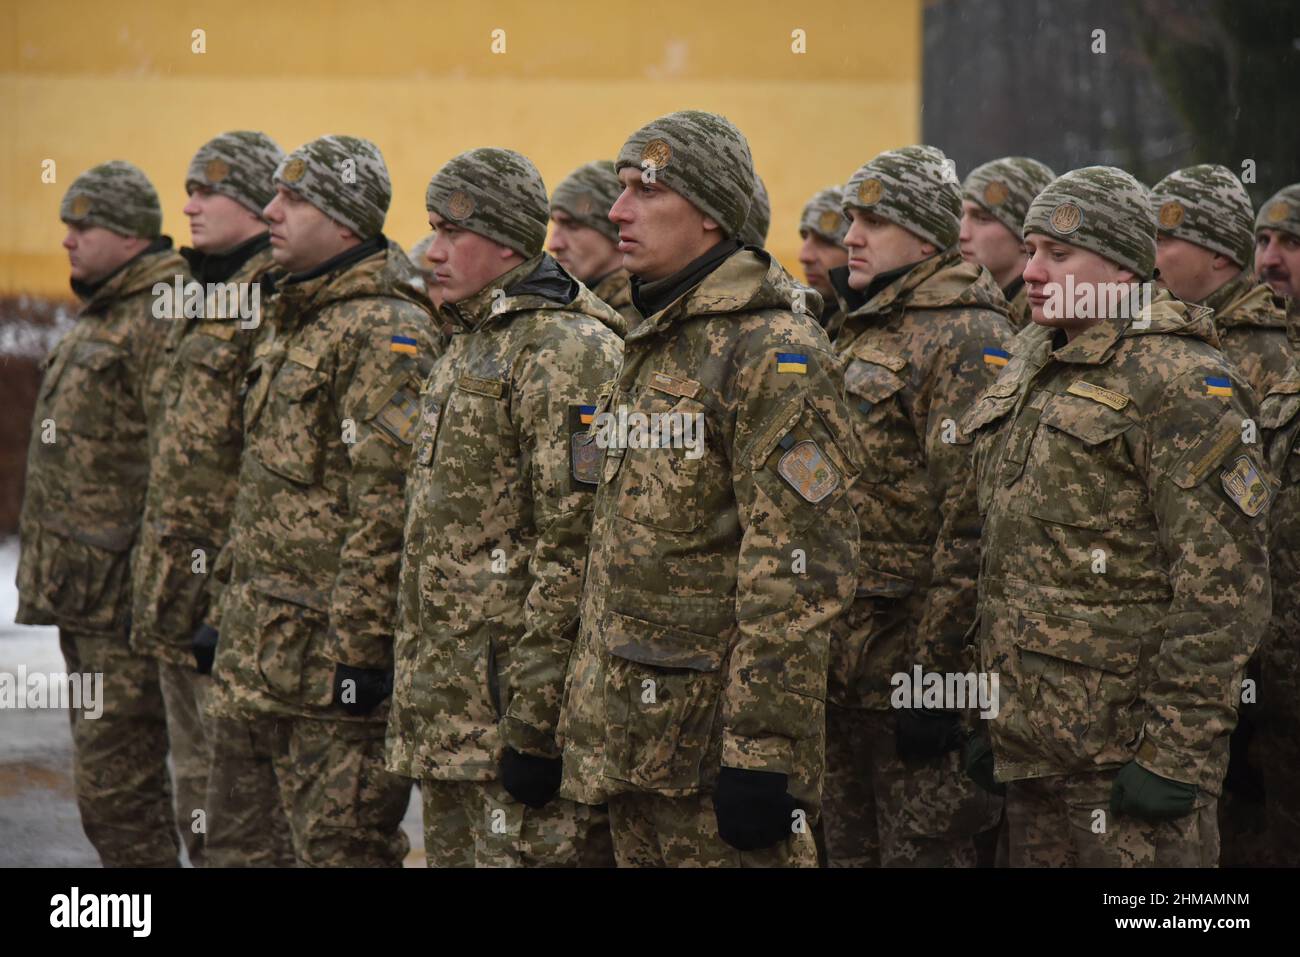 Starychi, Ukraine 2 february 2017. Ukrainian soldiers seen during Opening ceremony of the next stage of training of the Armed Forces units under the program 'Joint Multinational Training Group - Ukraine' (JMTG-U). Stock Photo